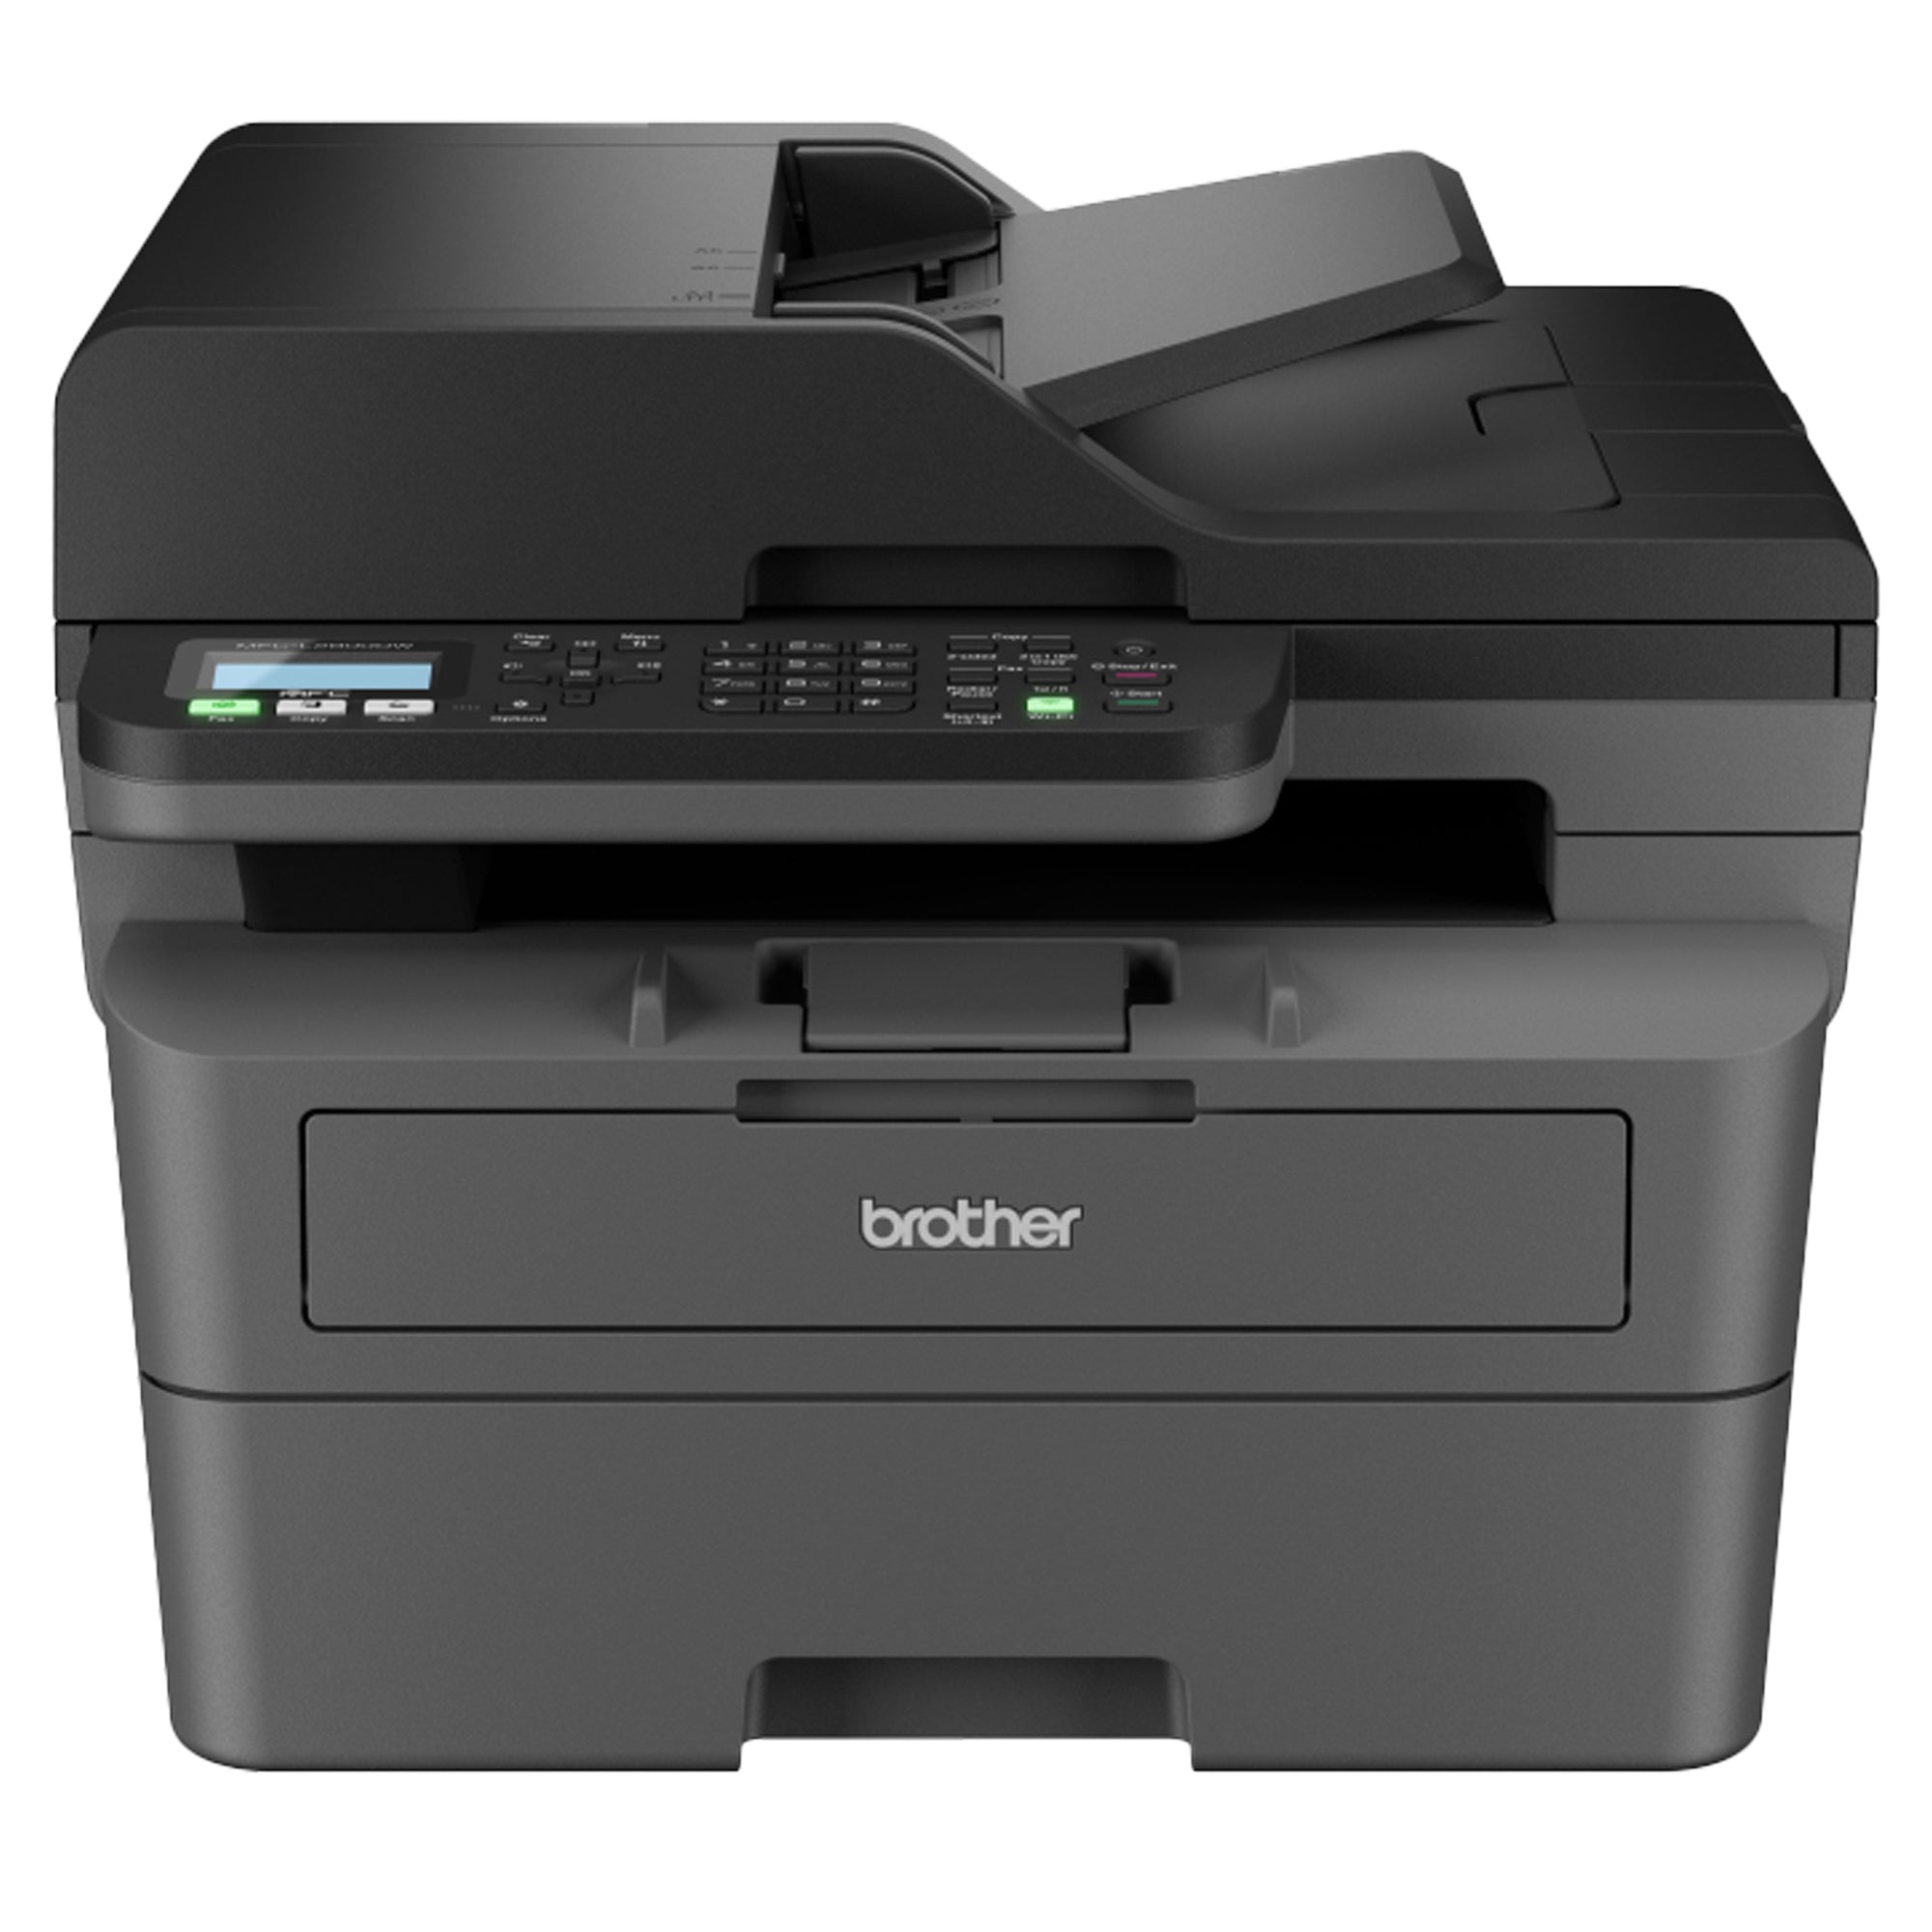 brother-multifunzione-mfcl2800dw-b-n-32ppm